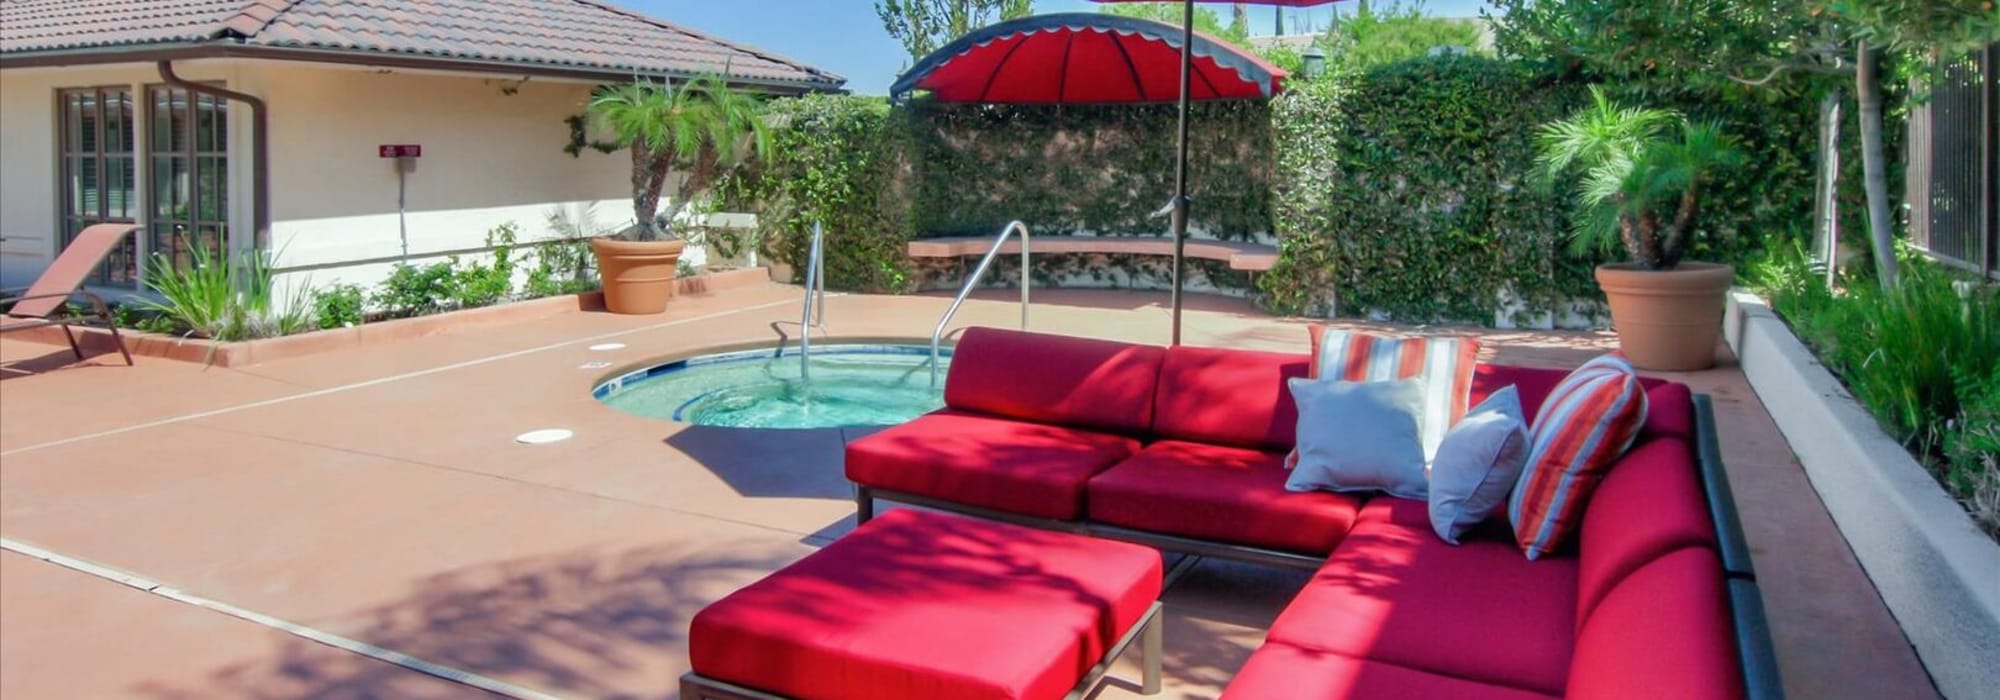 Patio seating by the hot tub at Park Sorrento in Bakersfield, California